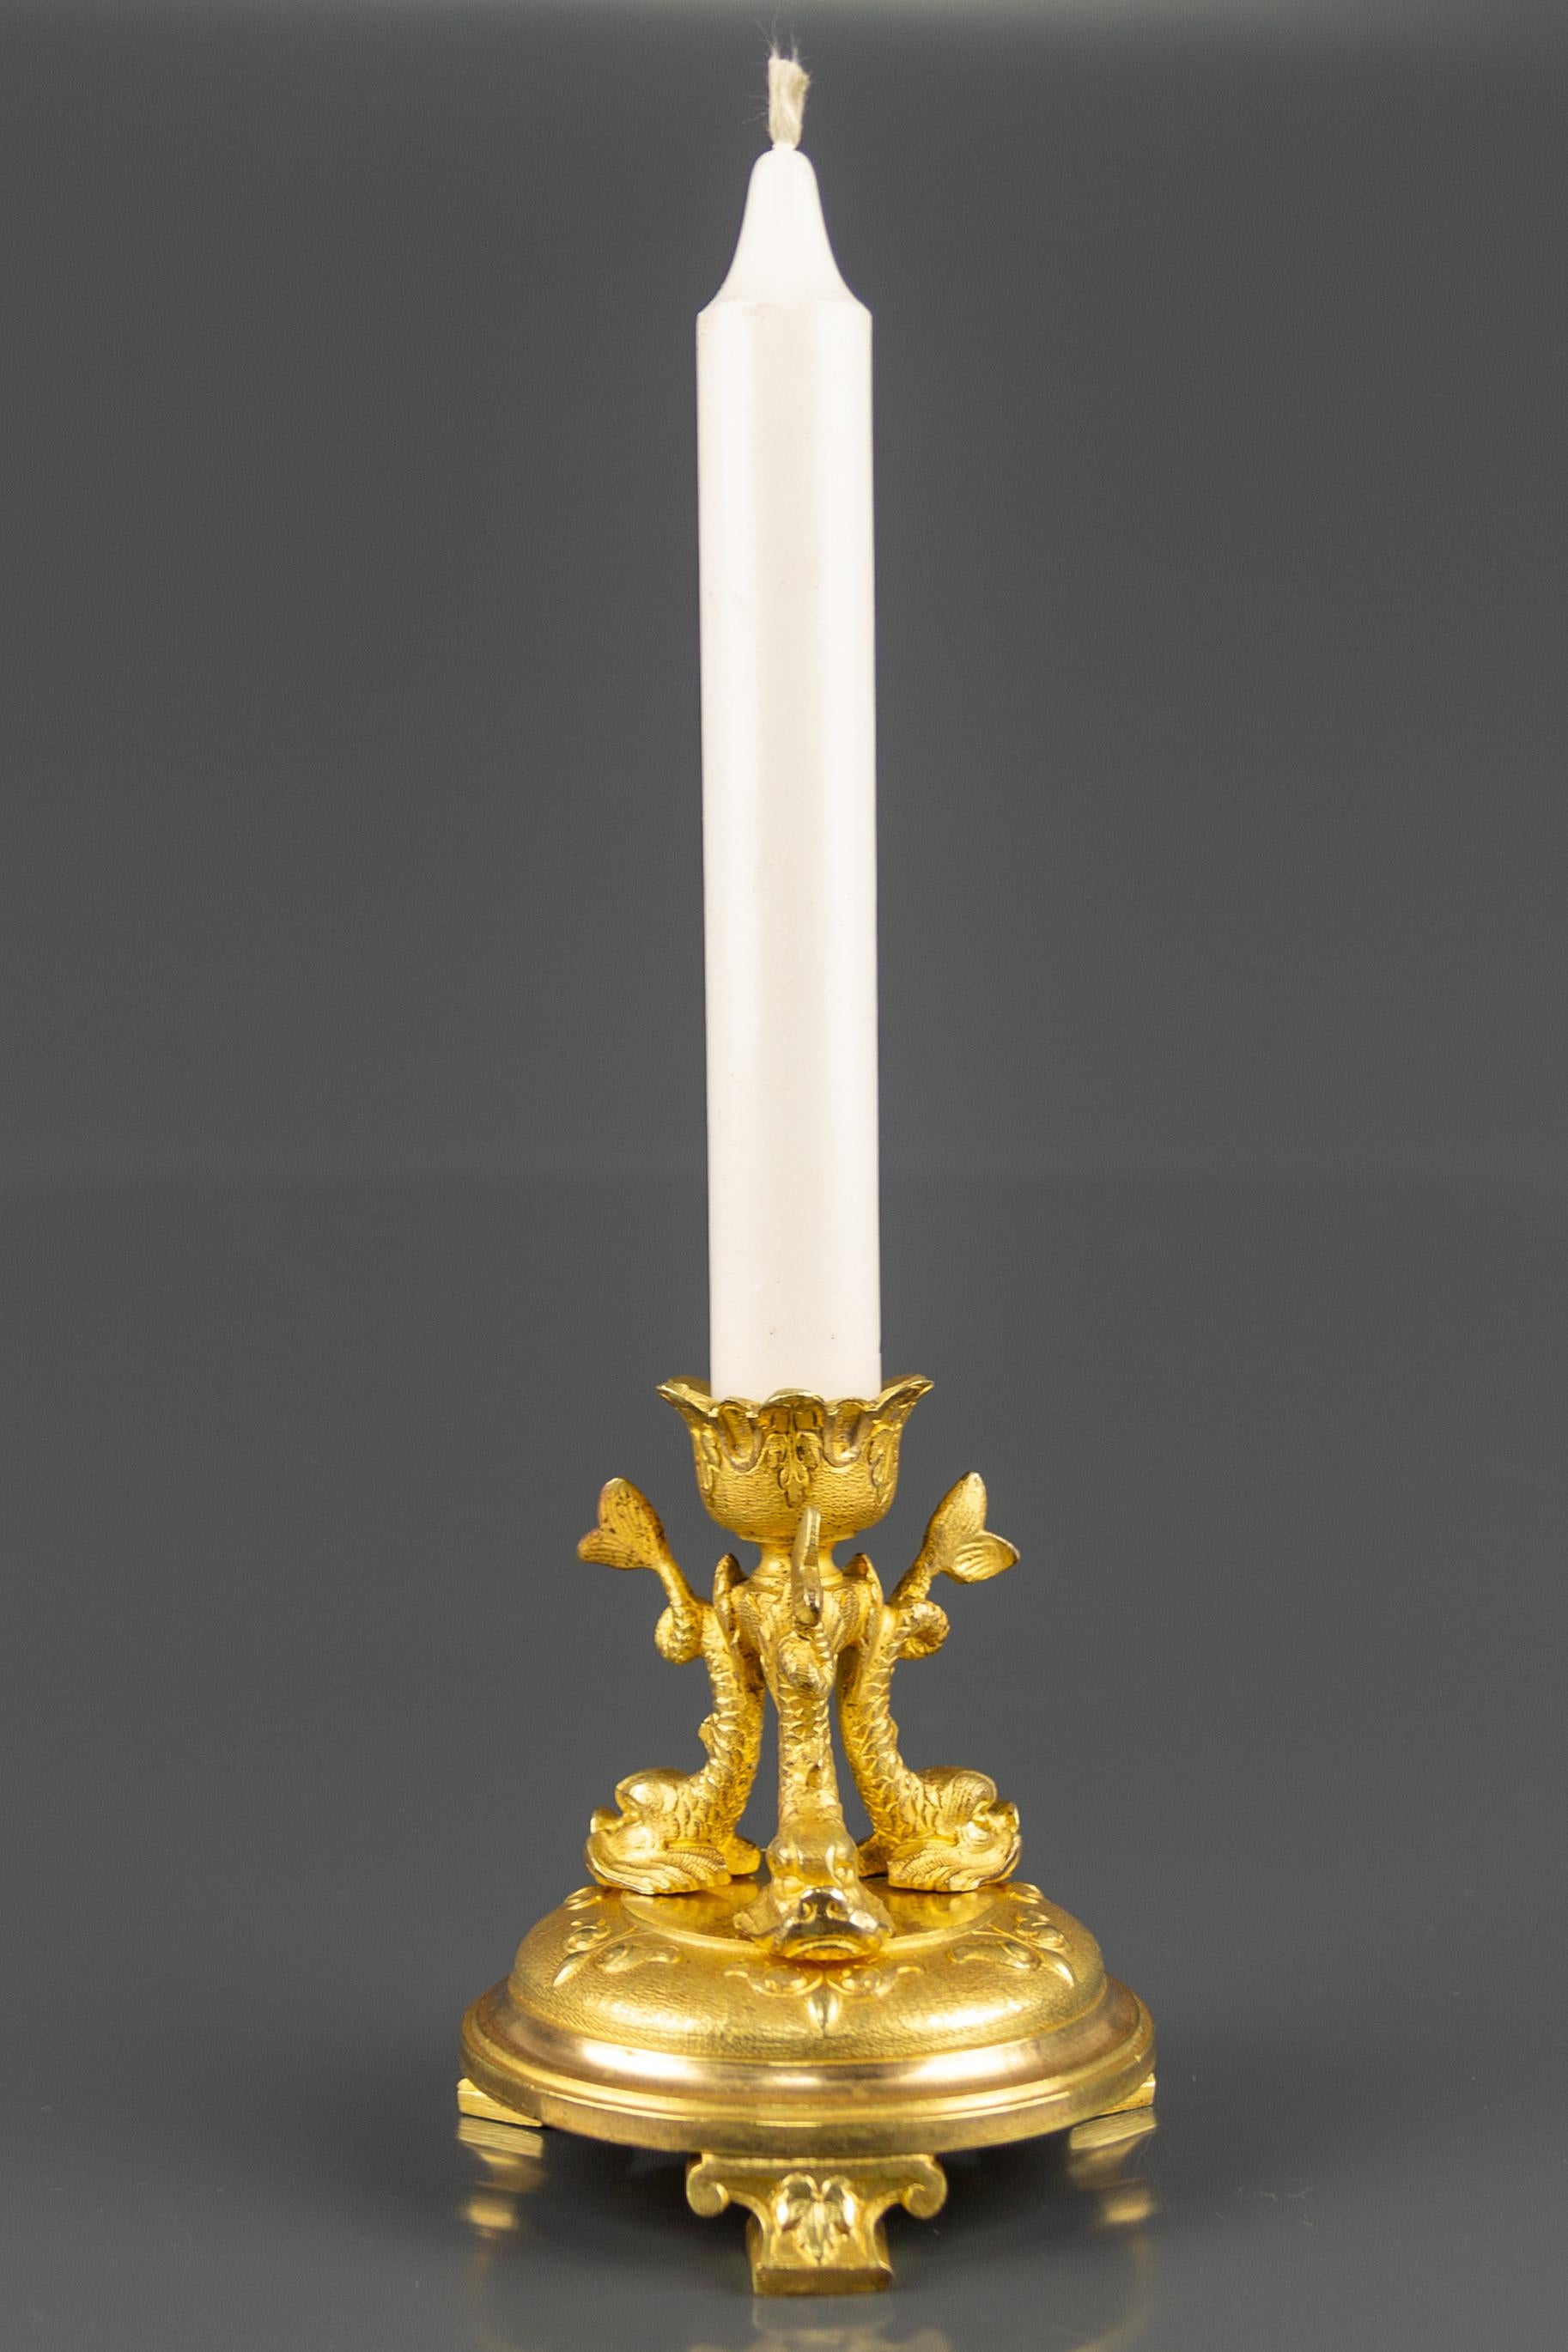 An adorable French gilt bronze candlestick on a circular base with leaves decorations. The candle cup is held by three finely detailed dolphins.
Dimensions: diameter of the base 10 cm / 3.93 in; height 11 cm / 4.33 in.
  